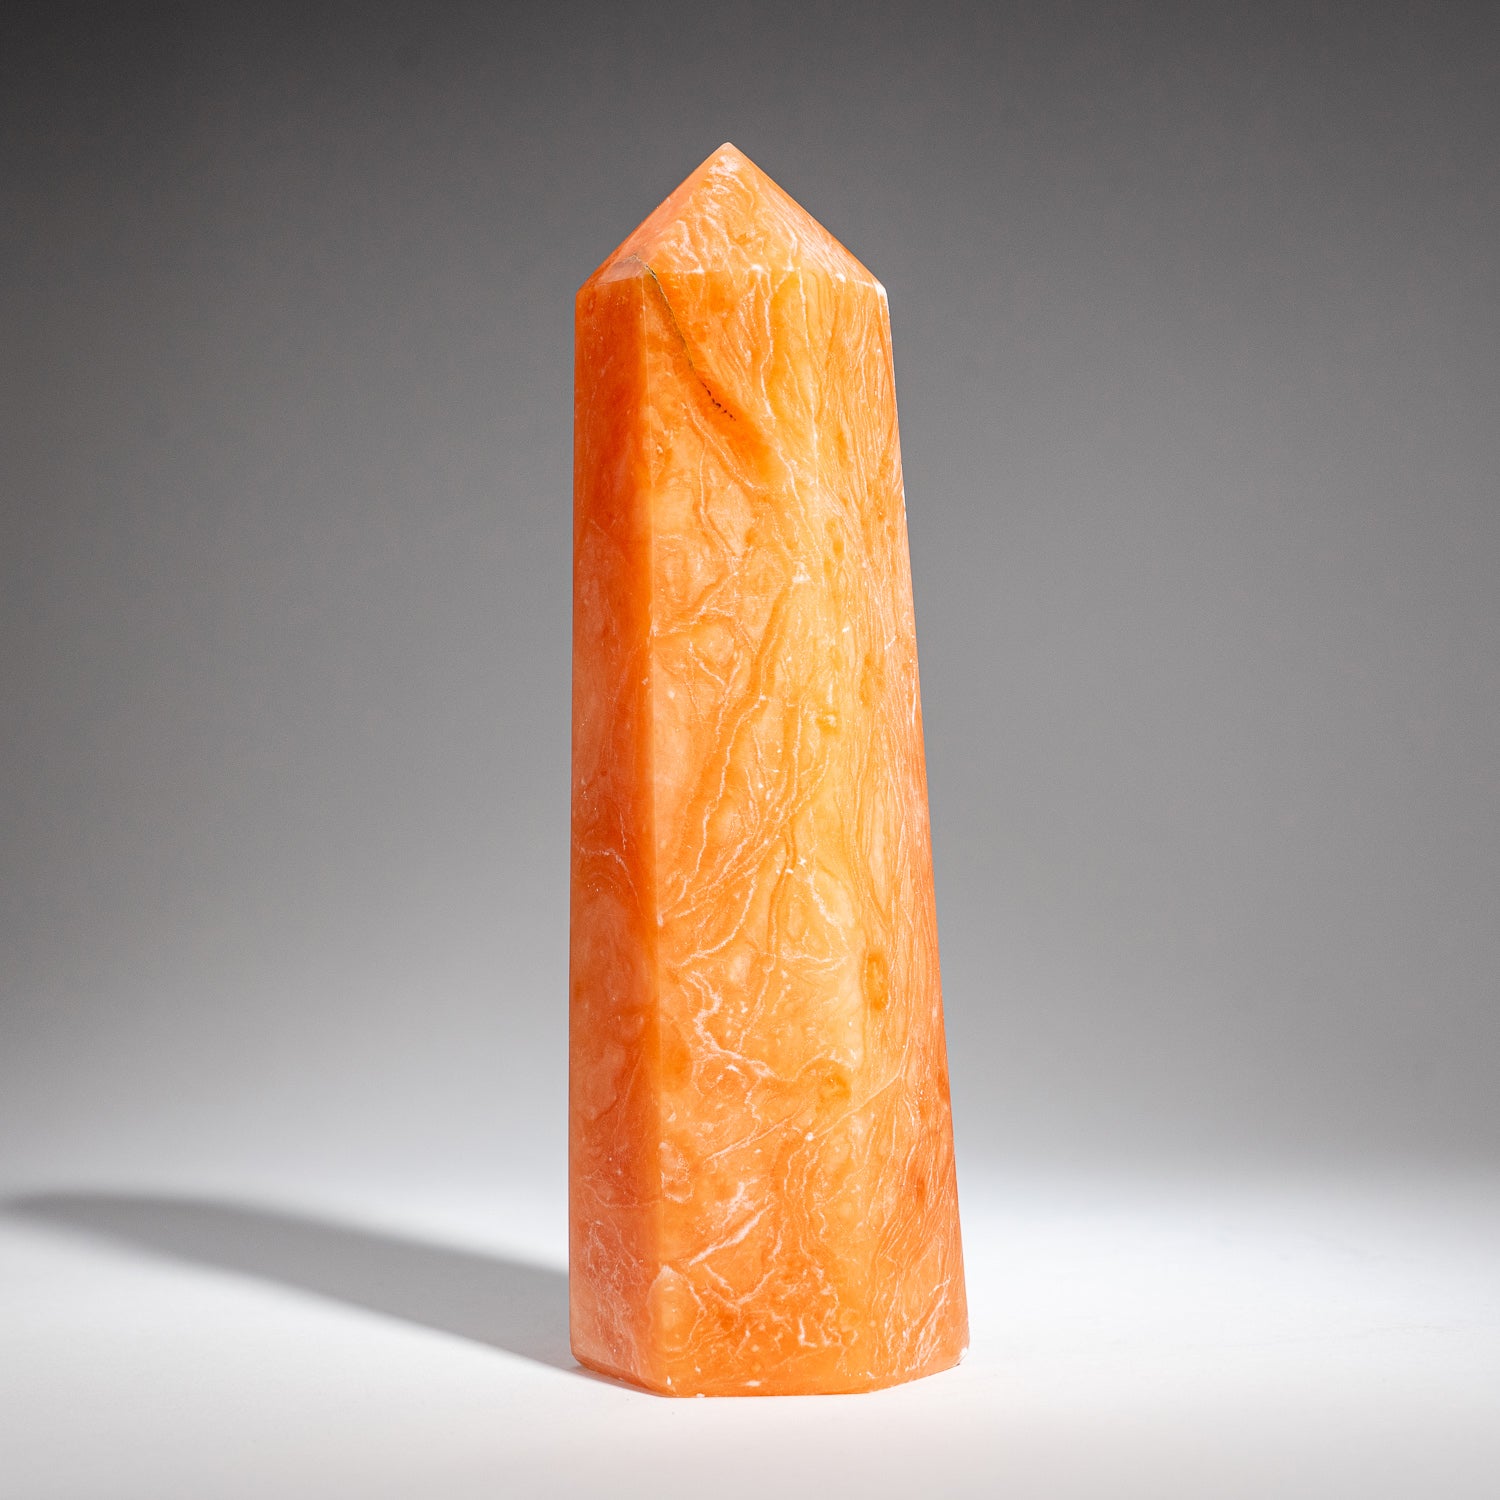 Genuine Polished Orange Selenite Point from Morocco (2.5 lbs)